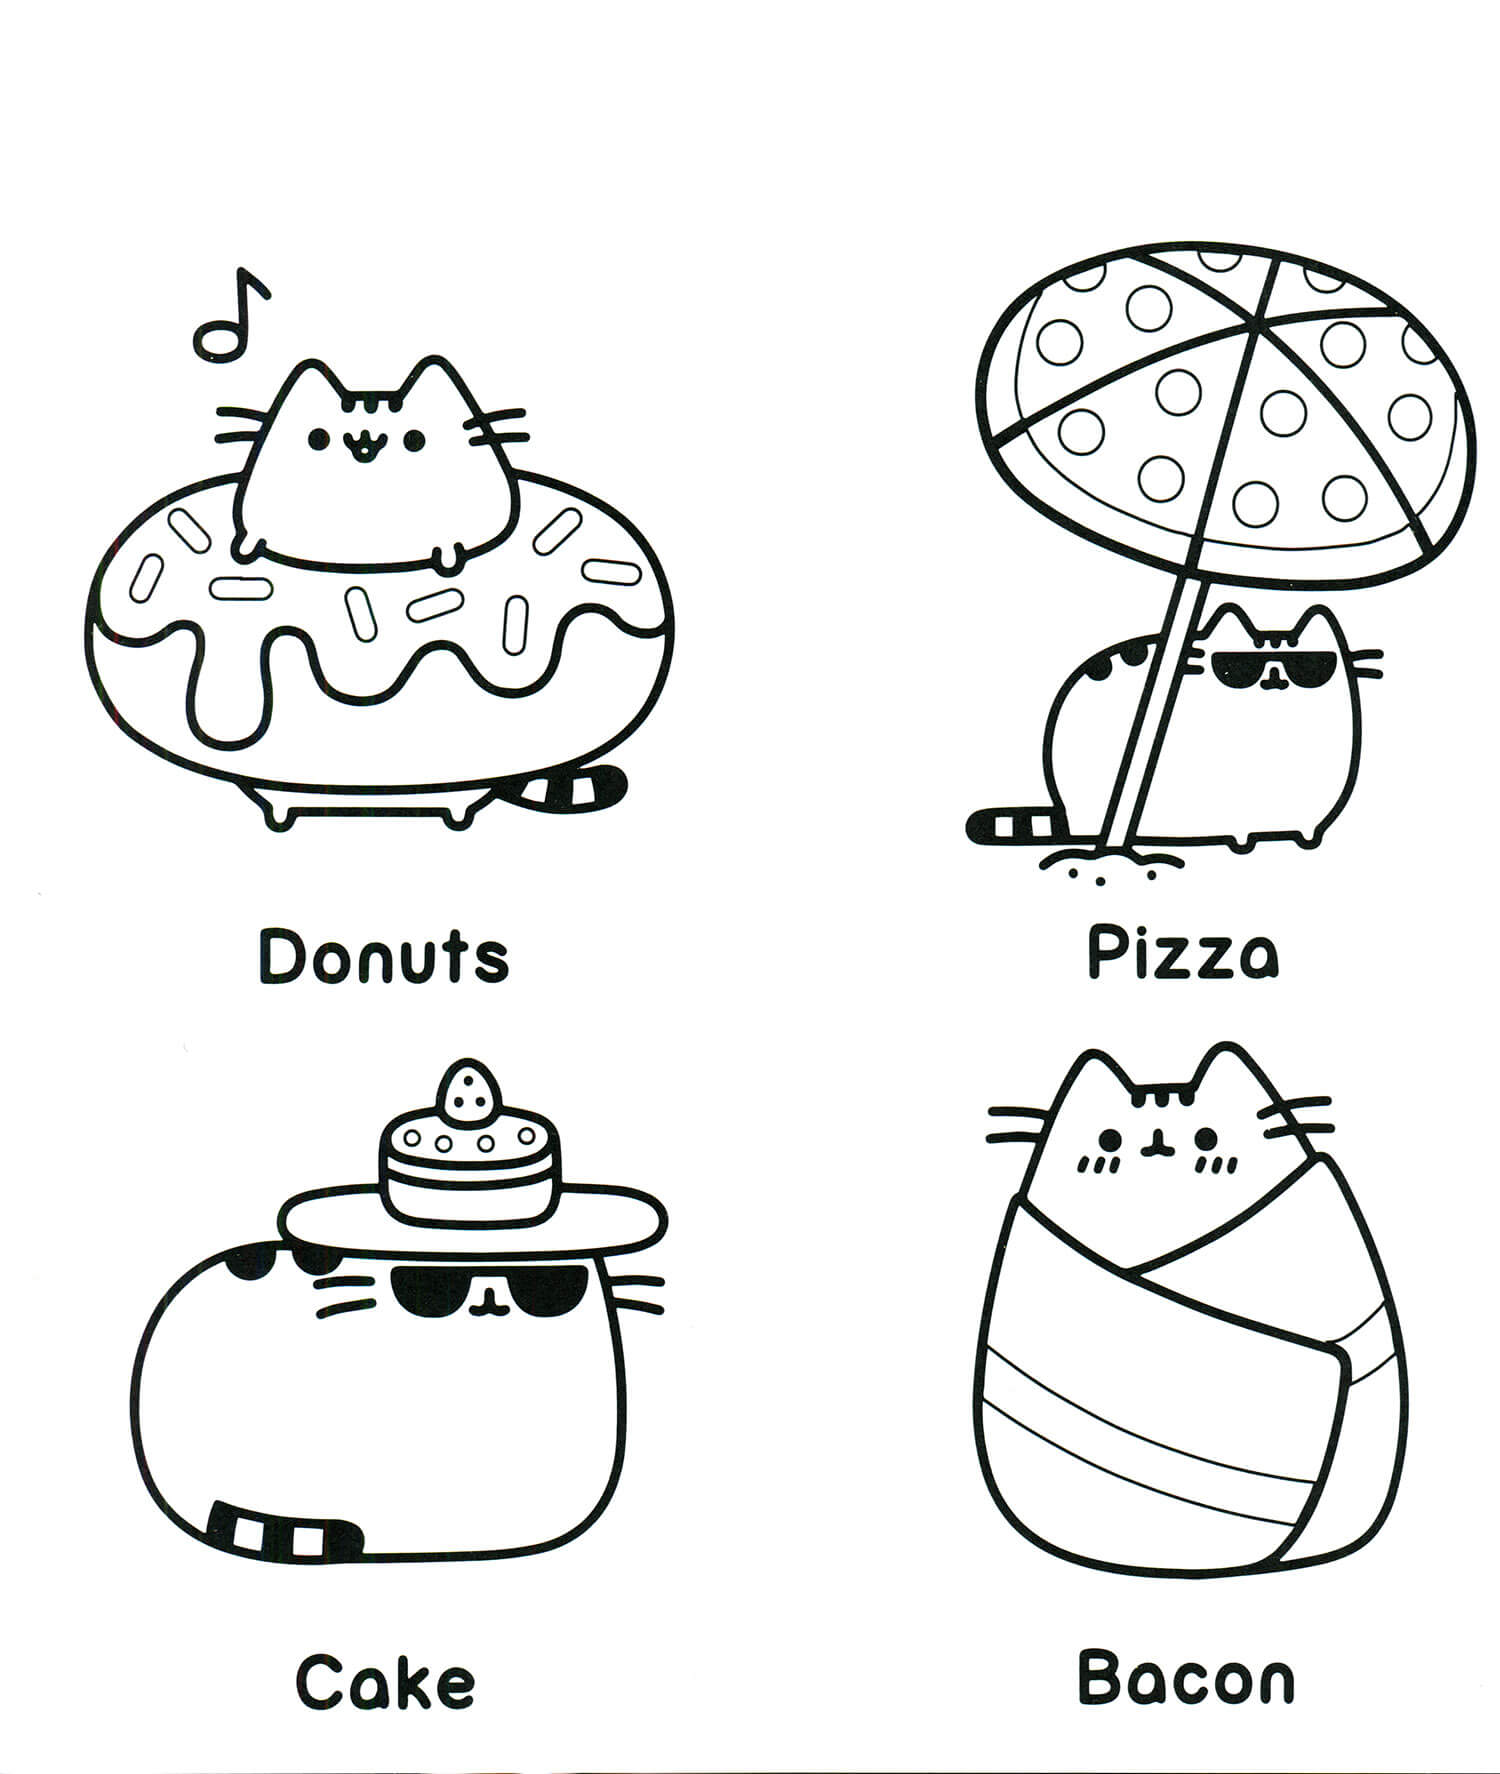 Pusheen Coloring Pages - Free Printable Coloring Pages for Kids